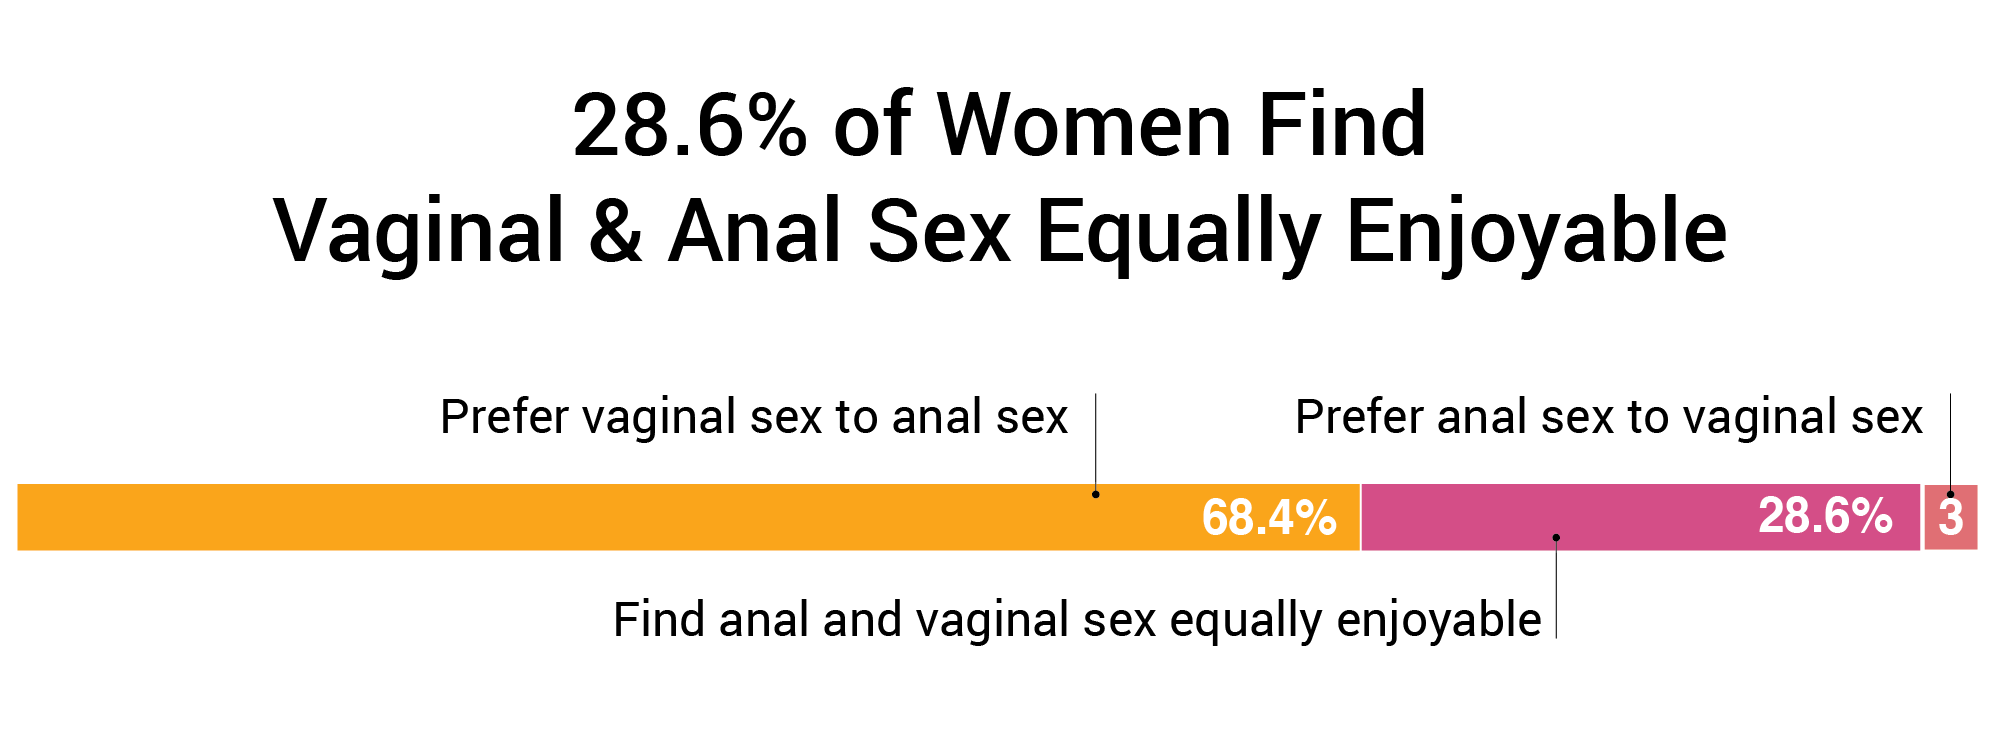 28.6 percent of women find anal sex and vaginal sex equally enjoyable